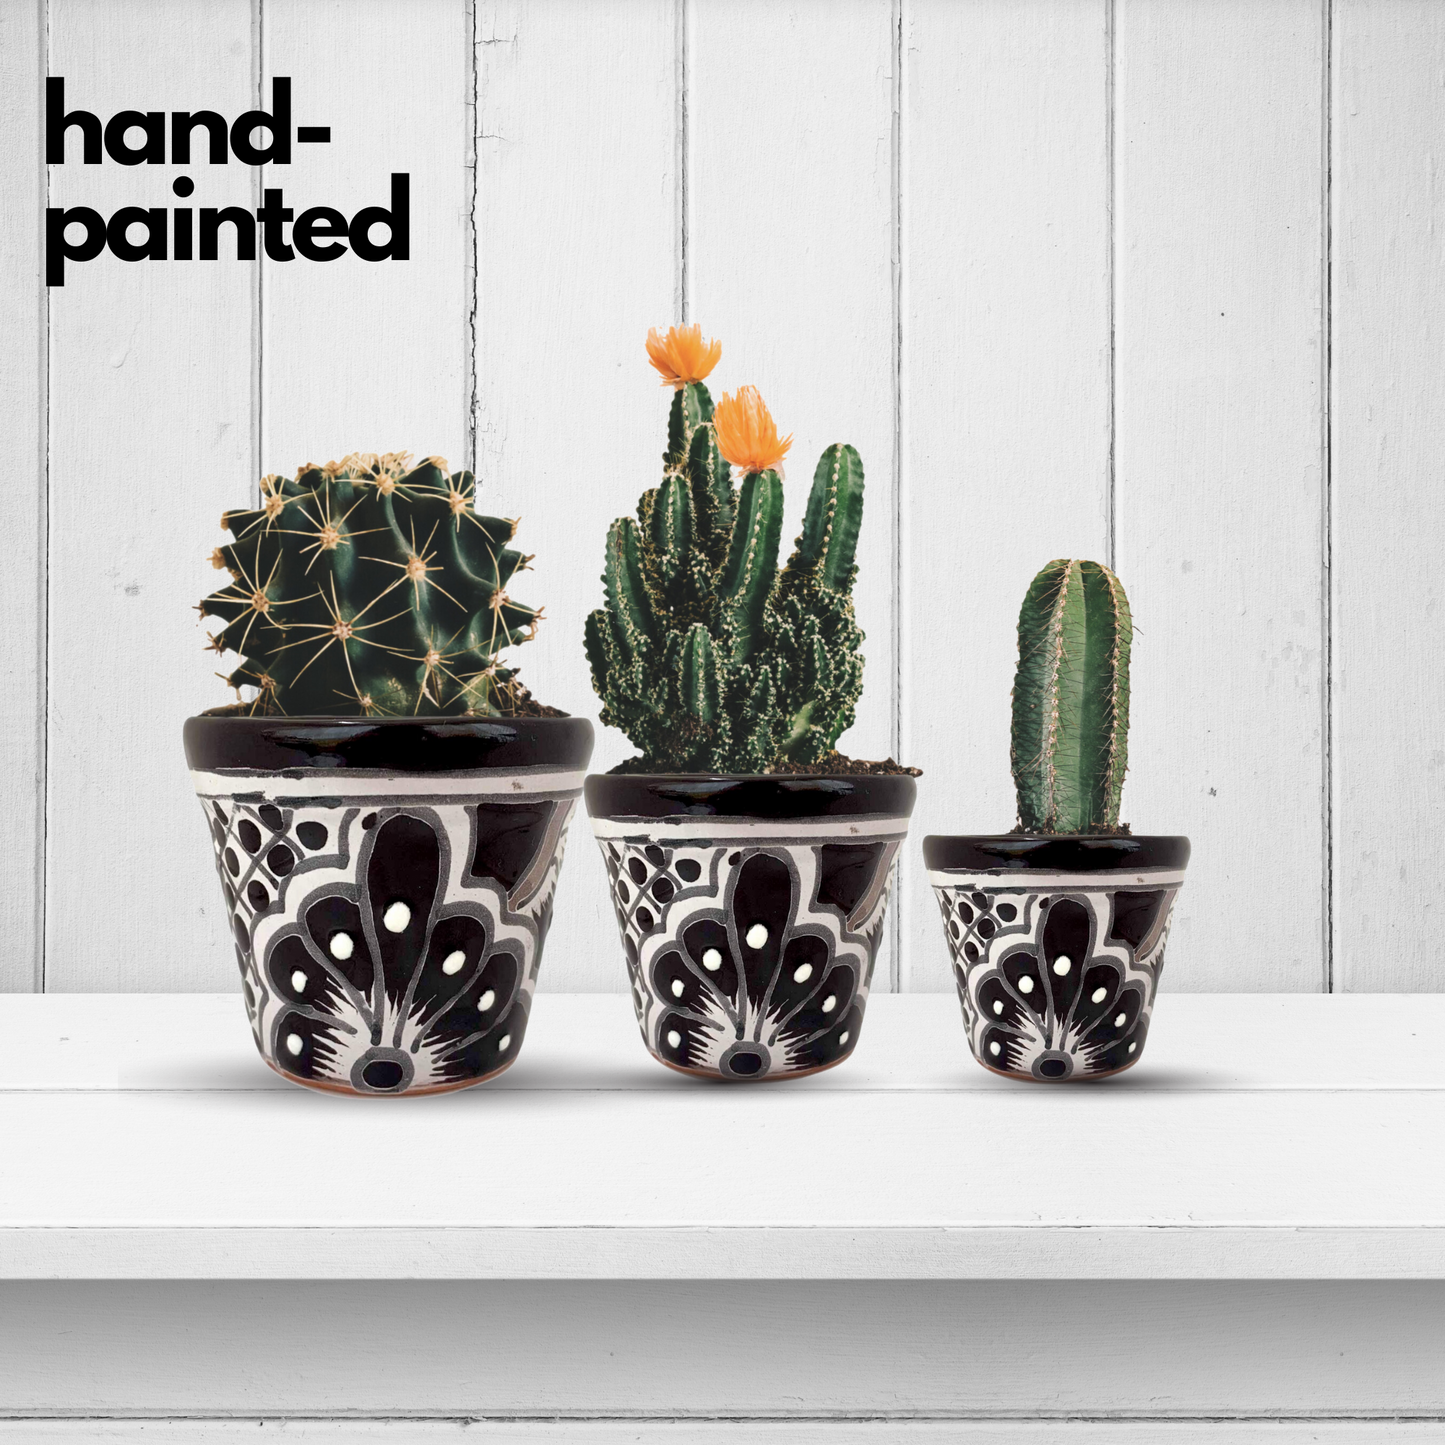 hand-painted Black and WhiteTalavera Ceramic Succulent Plant Pots - Hand-Painted Mexican Artistry by Casa Fiesta Designs.